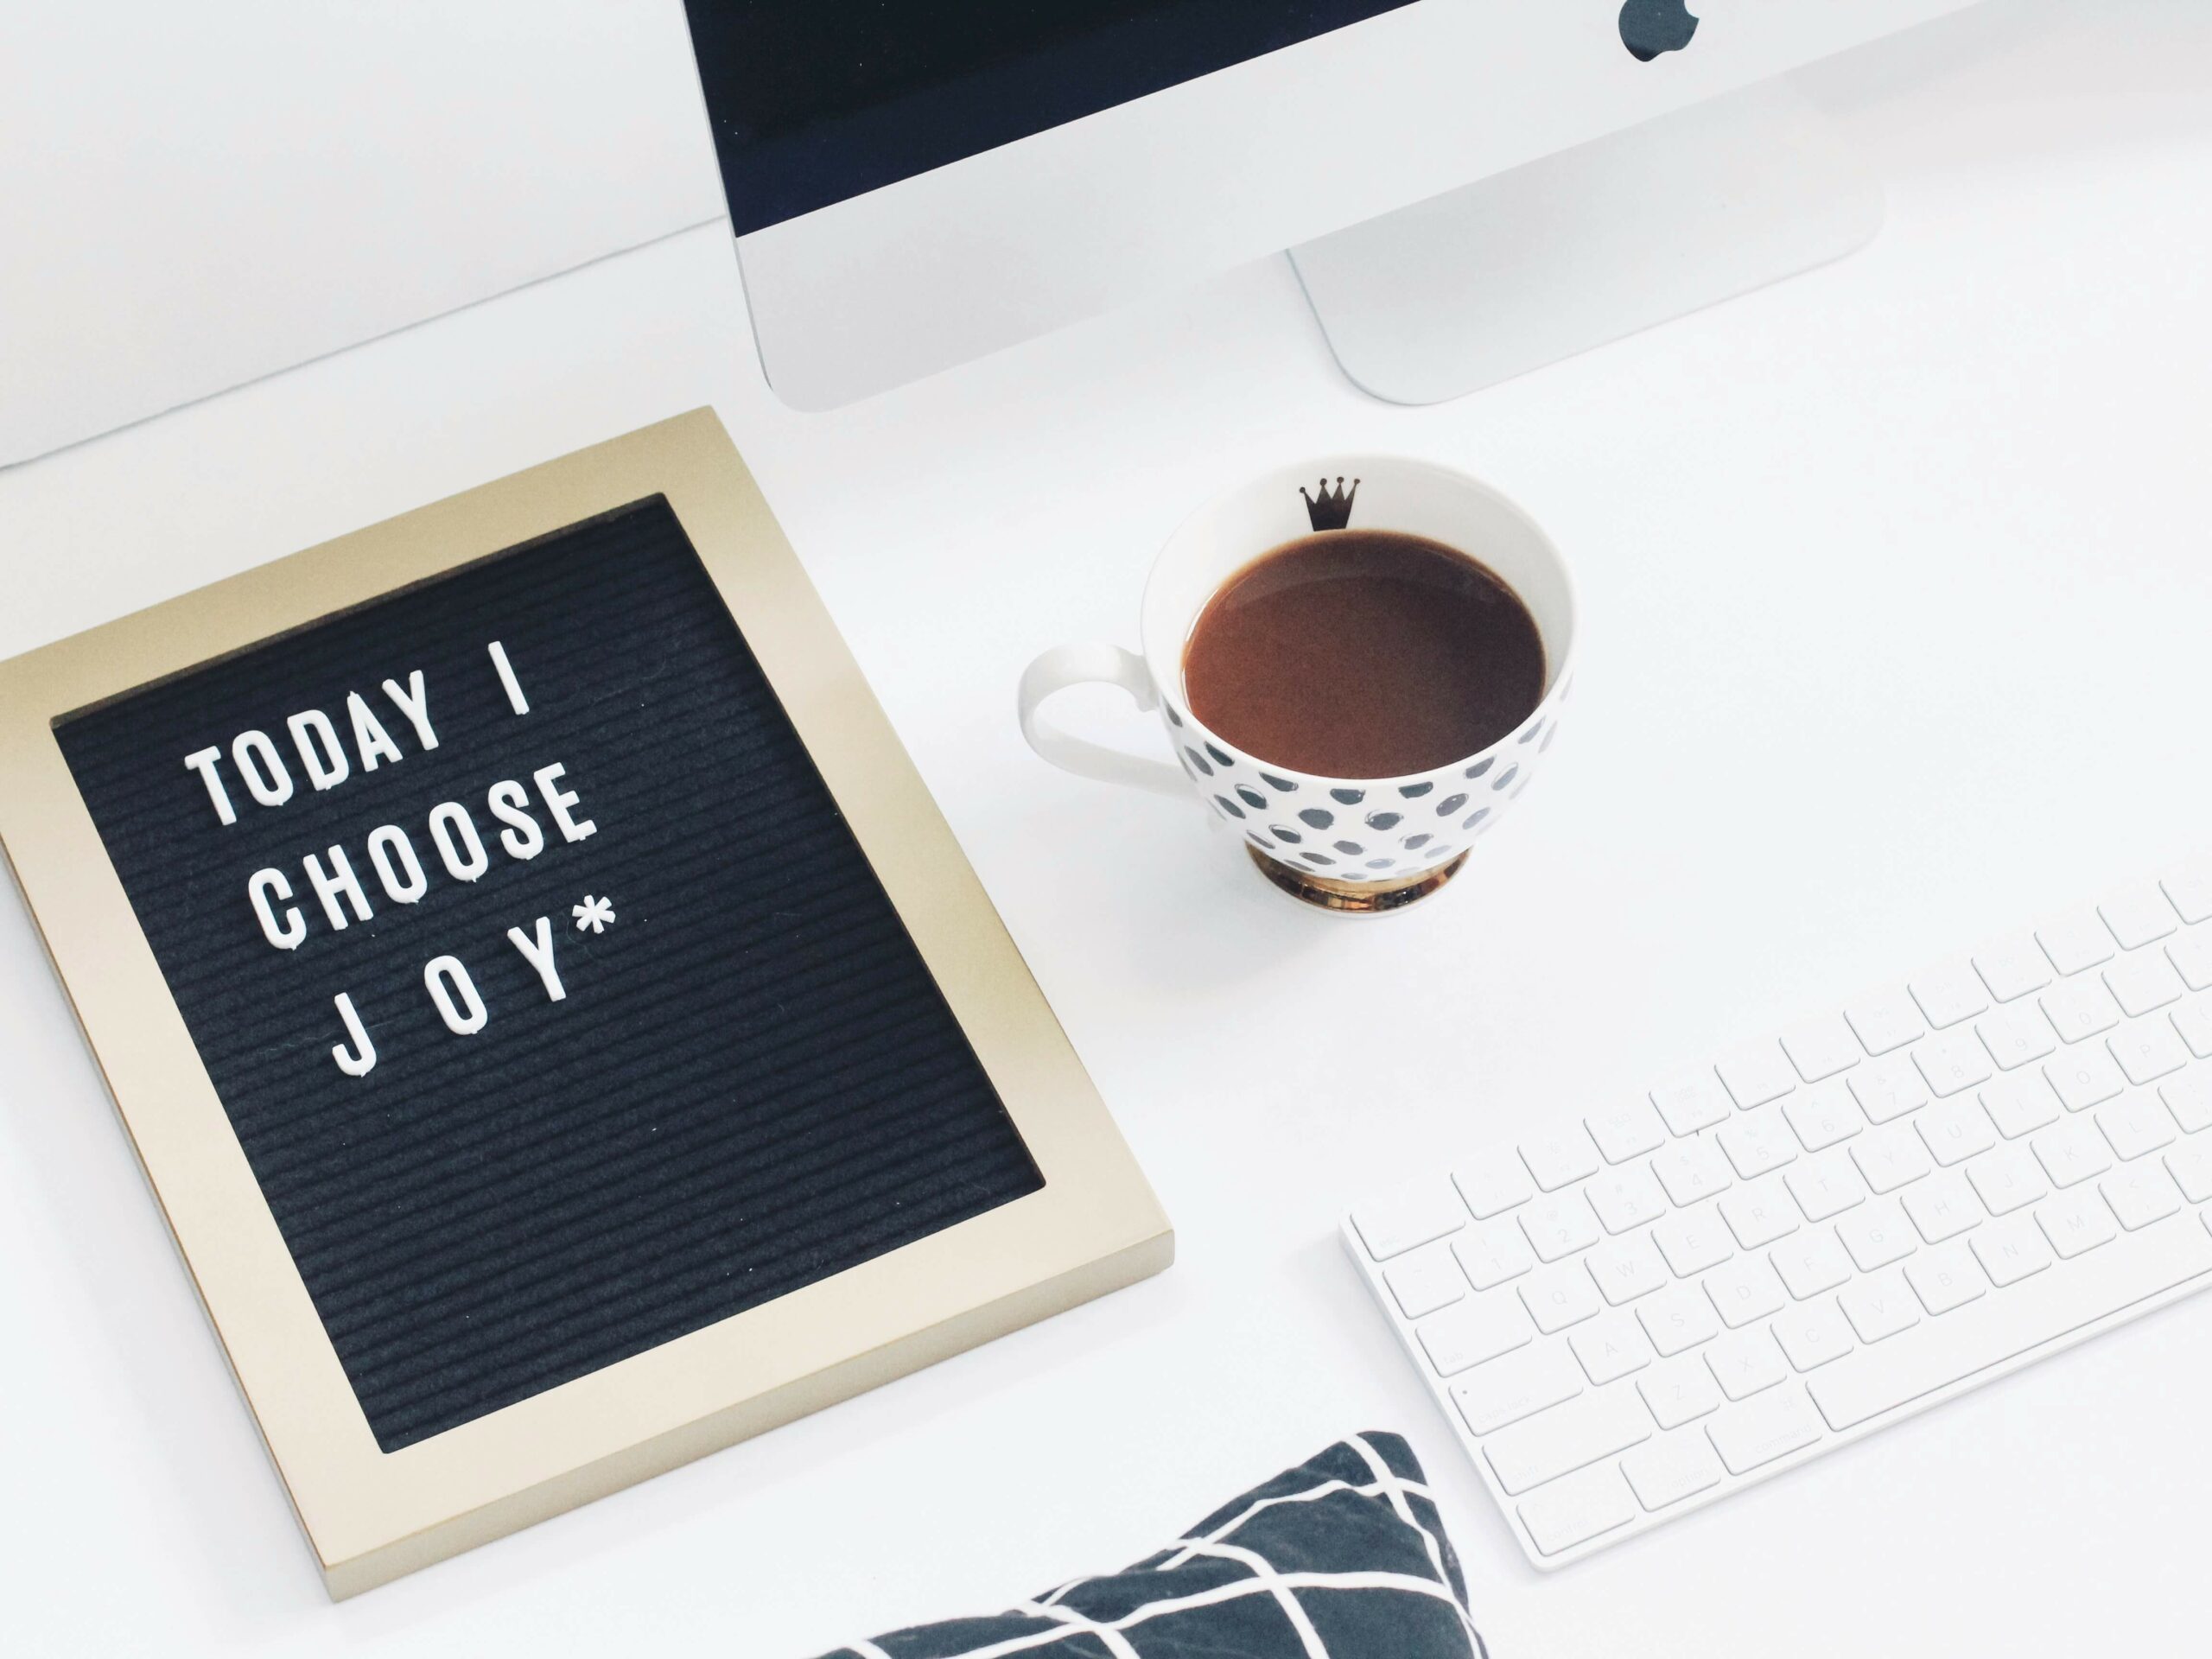 Image of a corkboard with the words "today I choose joy*" and a coffee cup and computer on a white desk